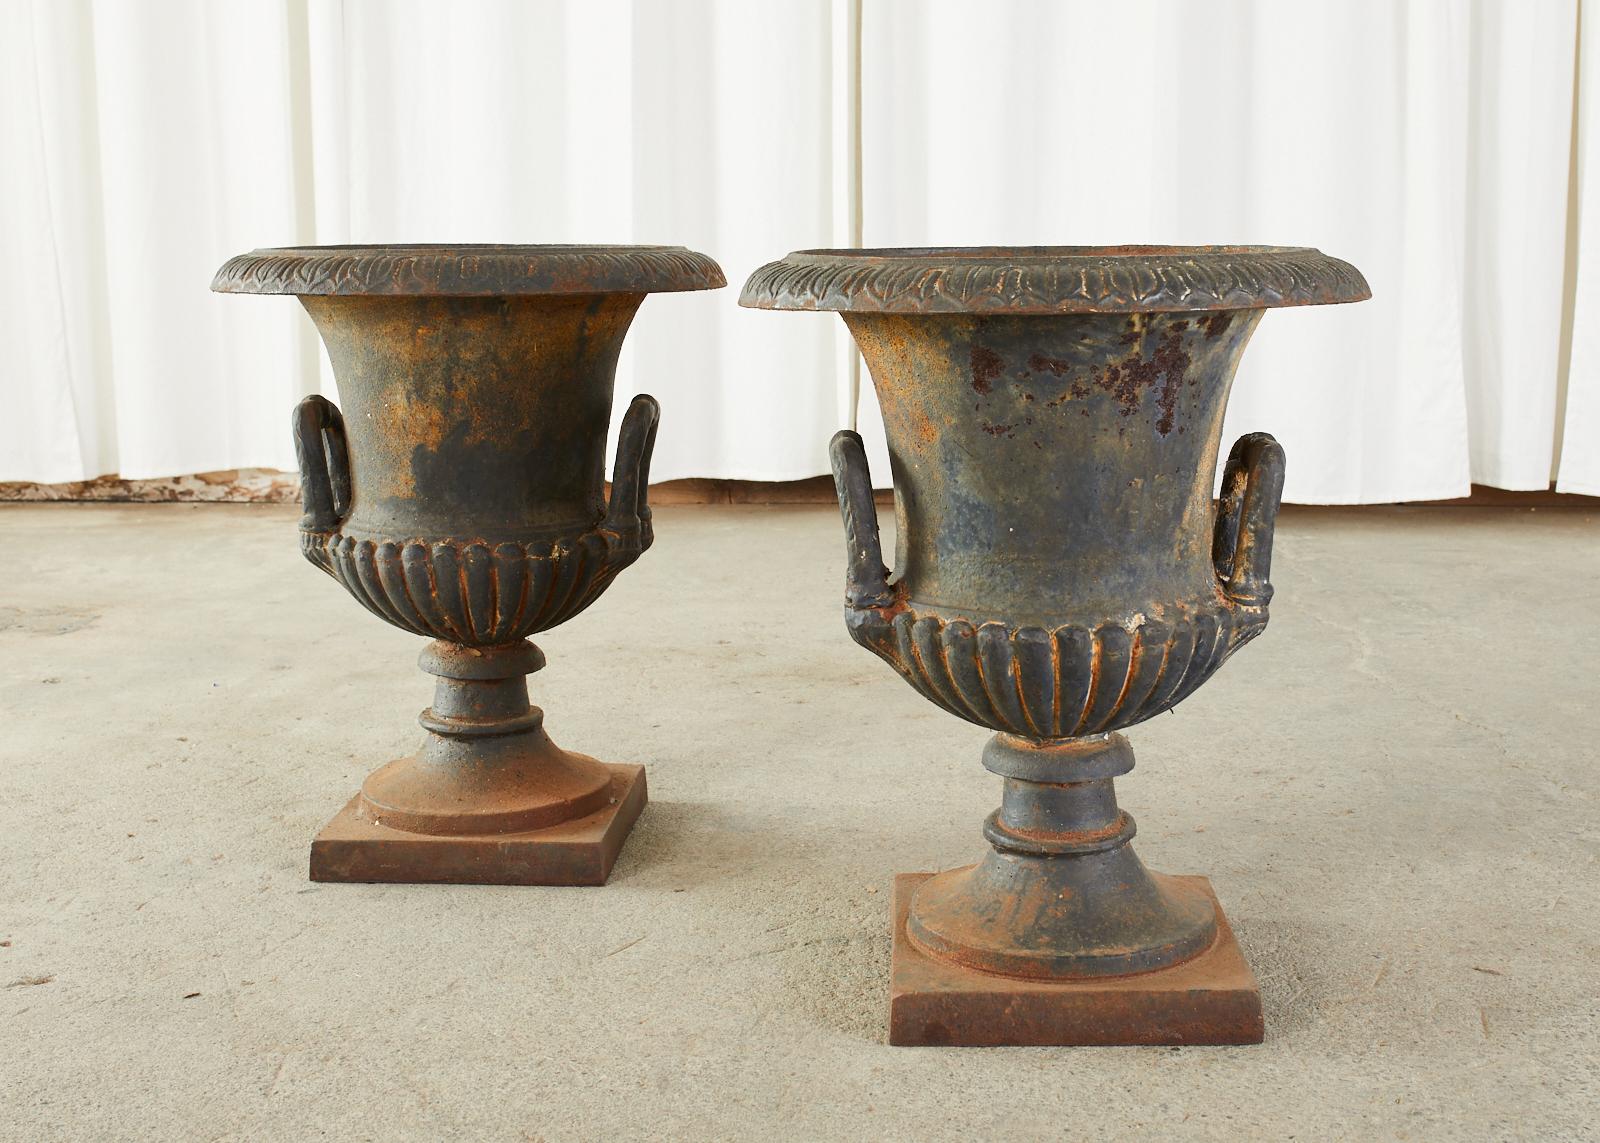 Matched large pair of English cast iron garden urns or jardinière planters styled in the neoclassical taste. The pair feature large handles on the sides and each is mounted to a square plinth. From an estate in Beverly Hills, CA.